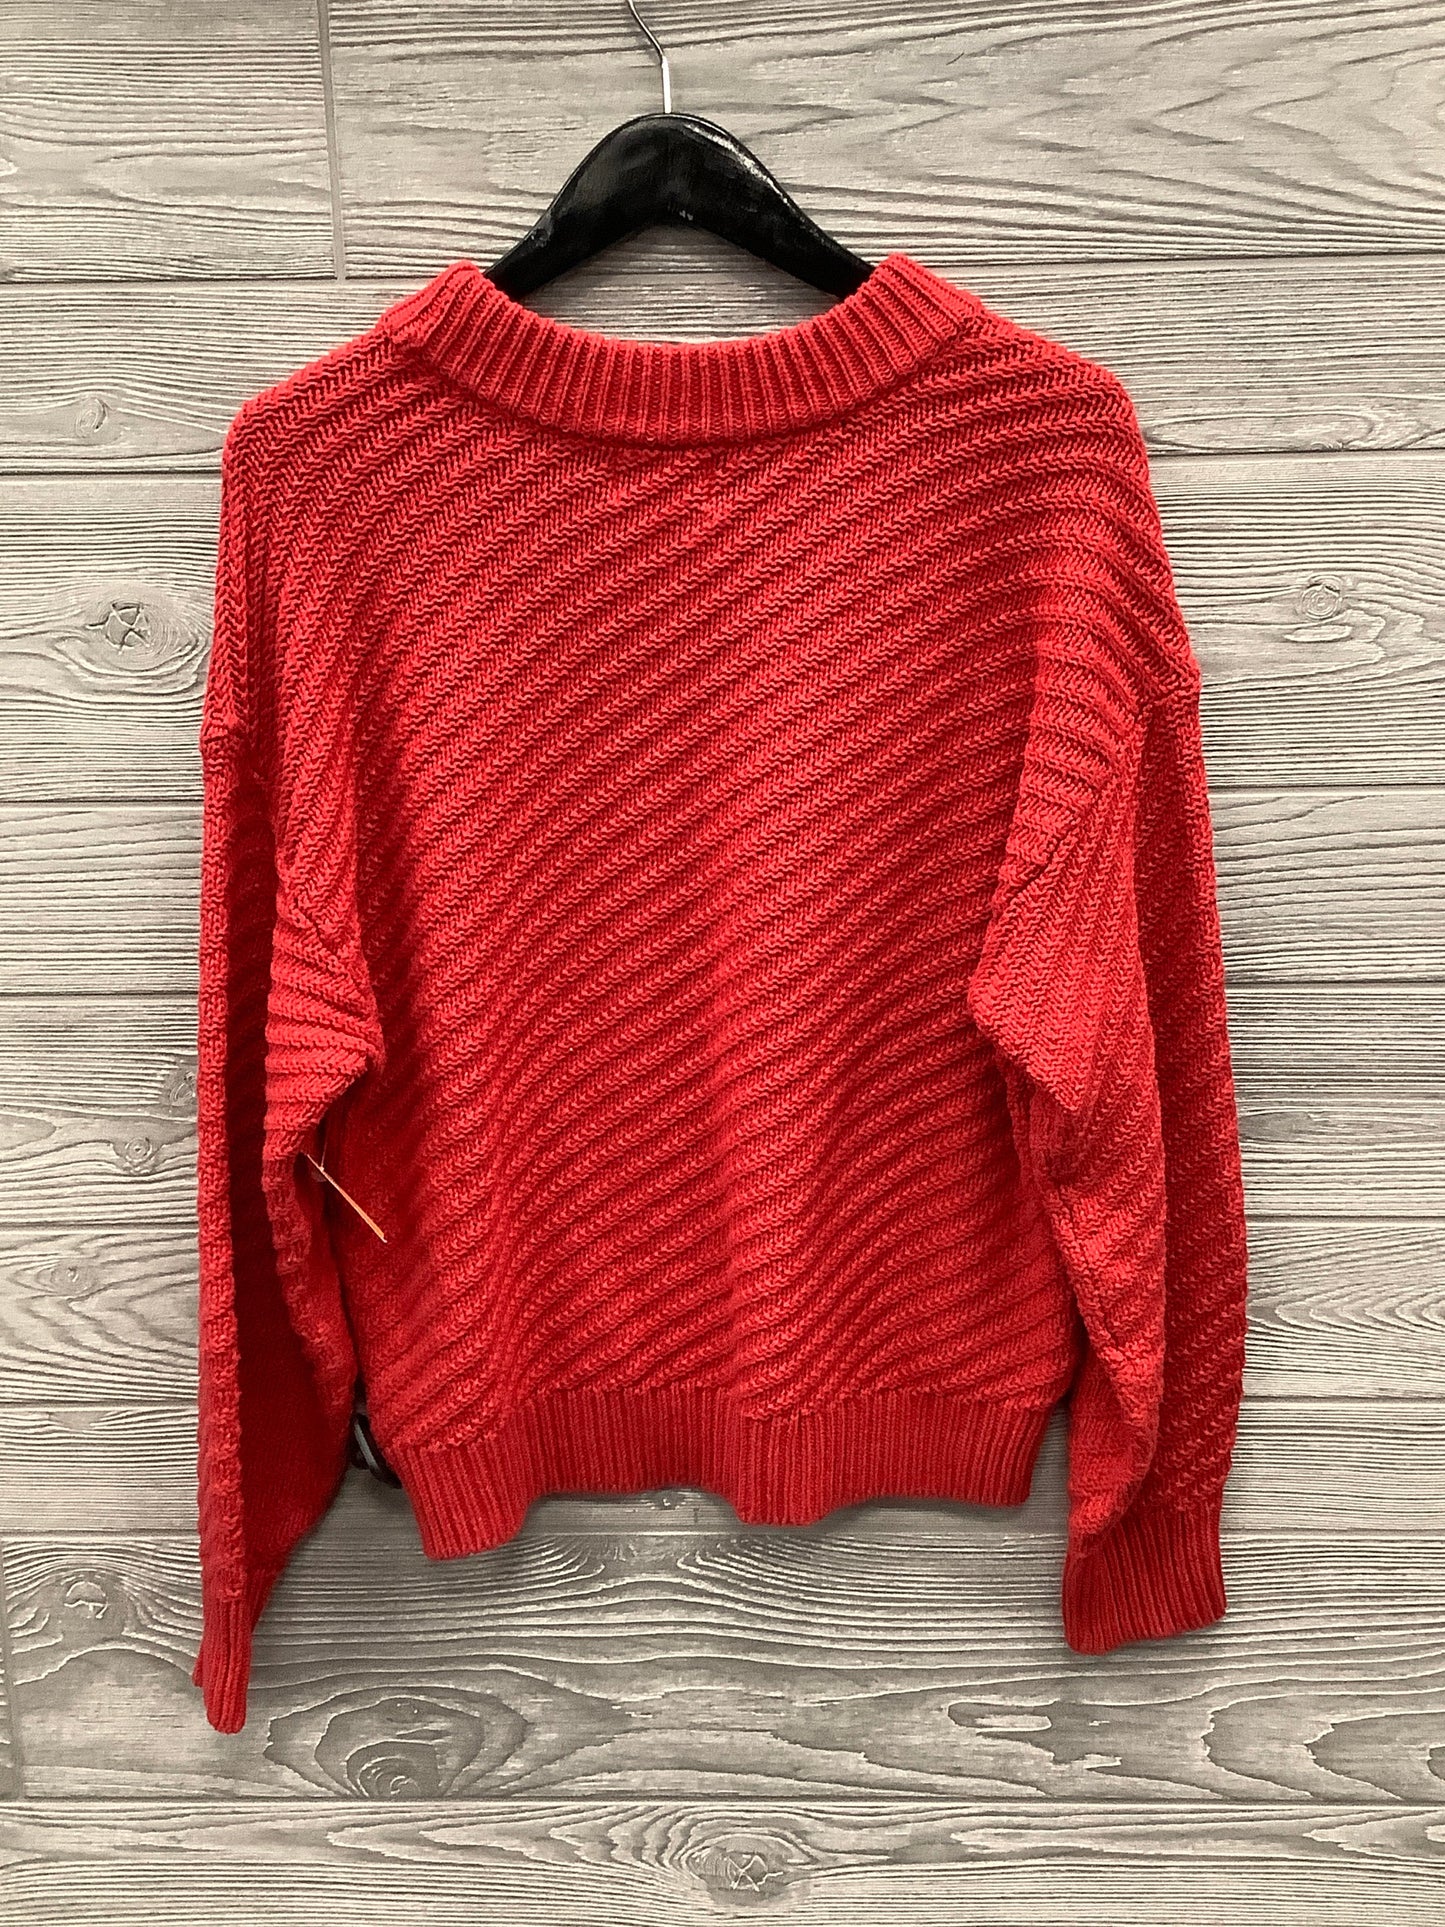 Sweater By Universal Thread  Size: L